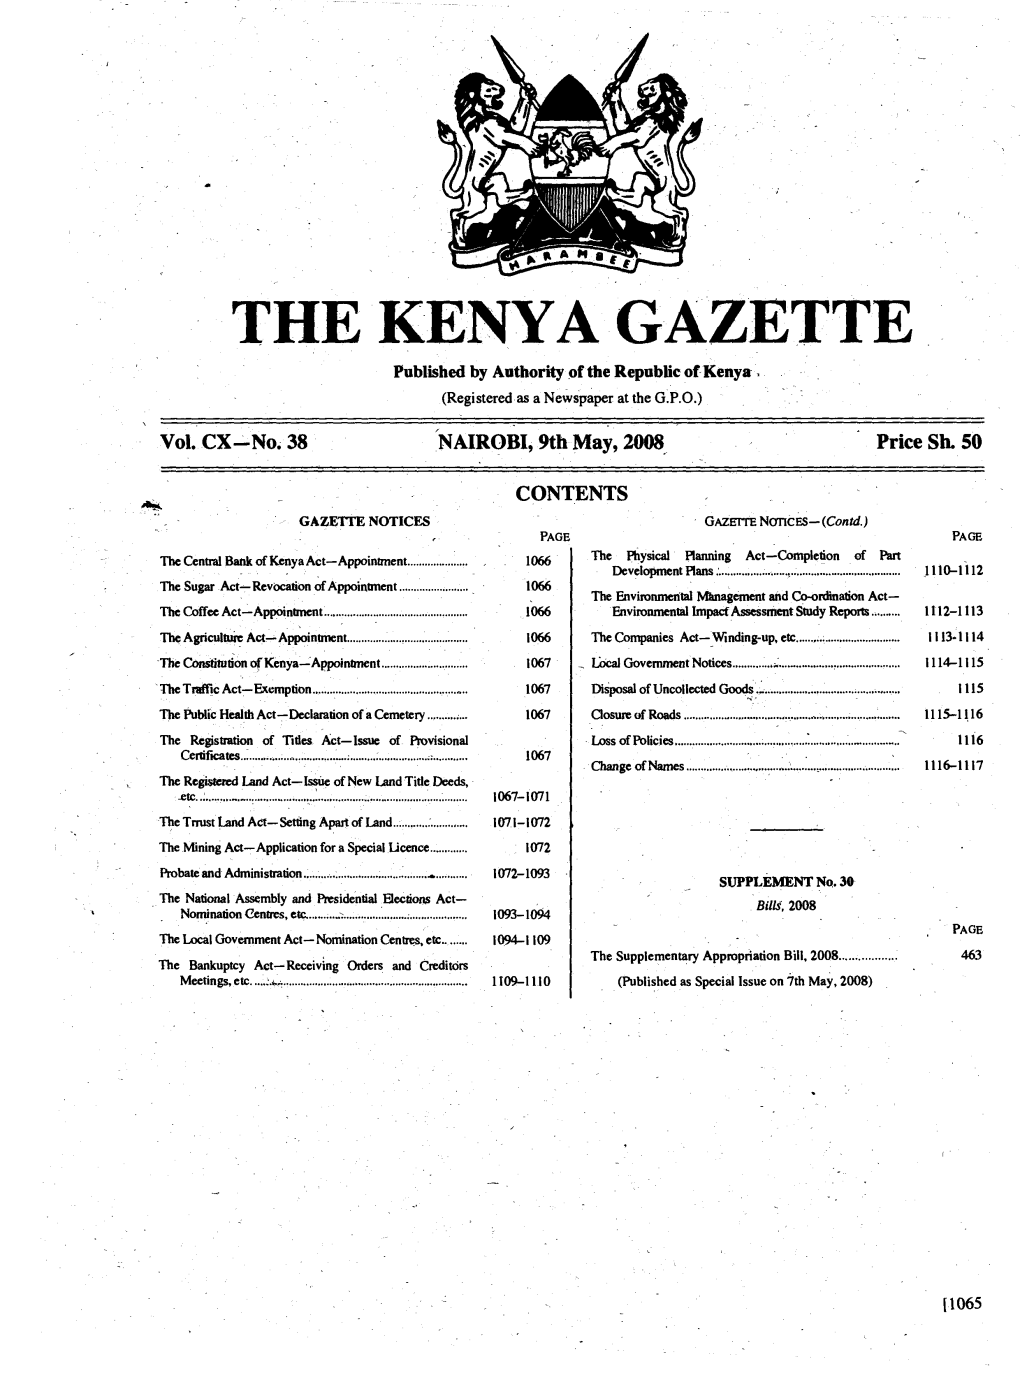 THE KENYA GAZ ETTE Published by Authority of the Republic of Kenya , (Registered As a Newspaper at the G.P.O.)